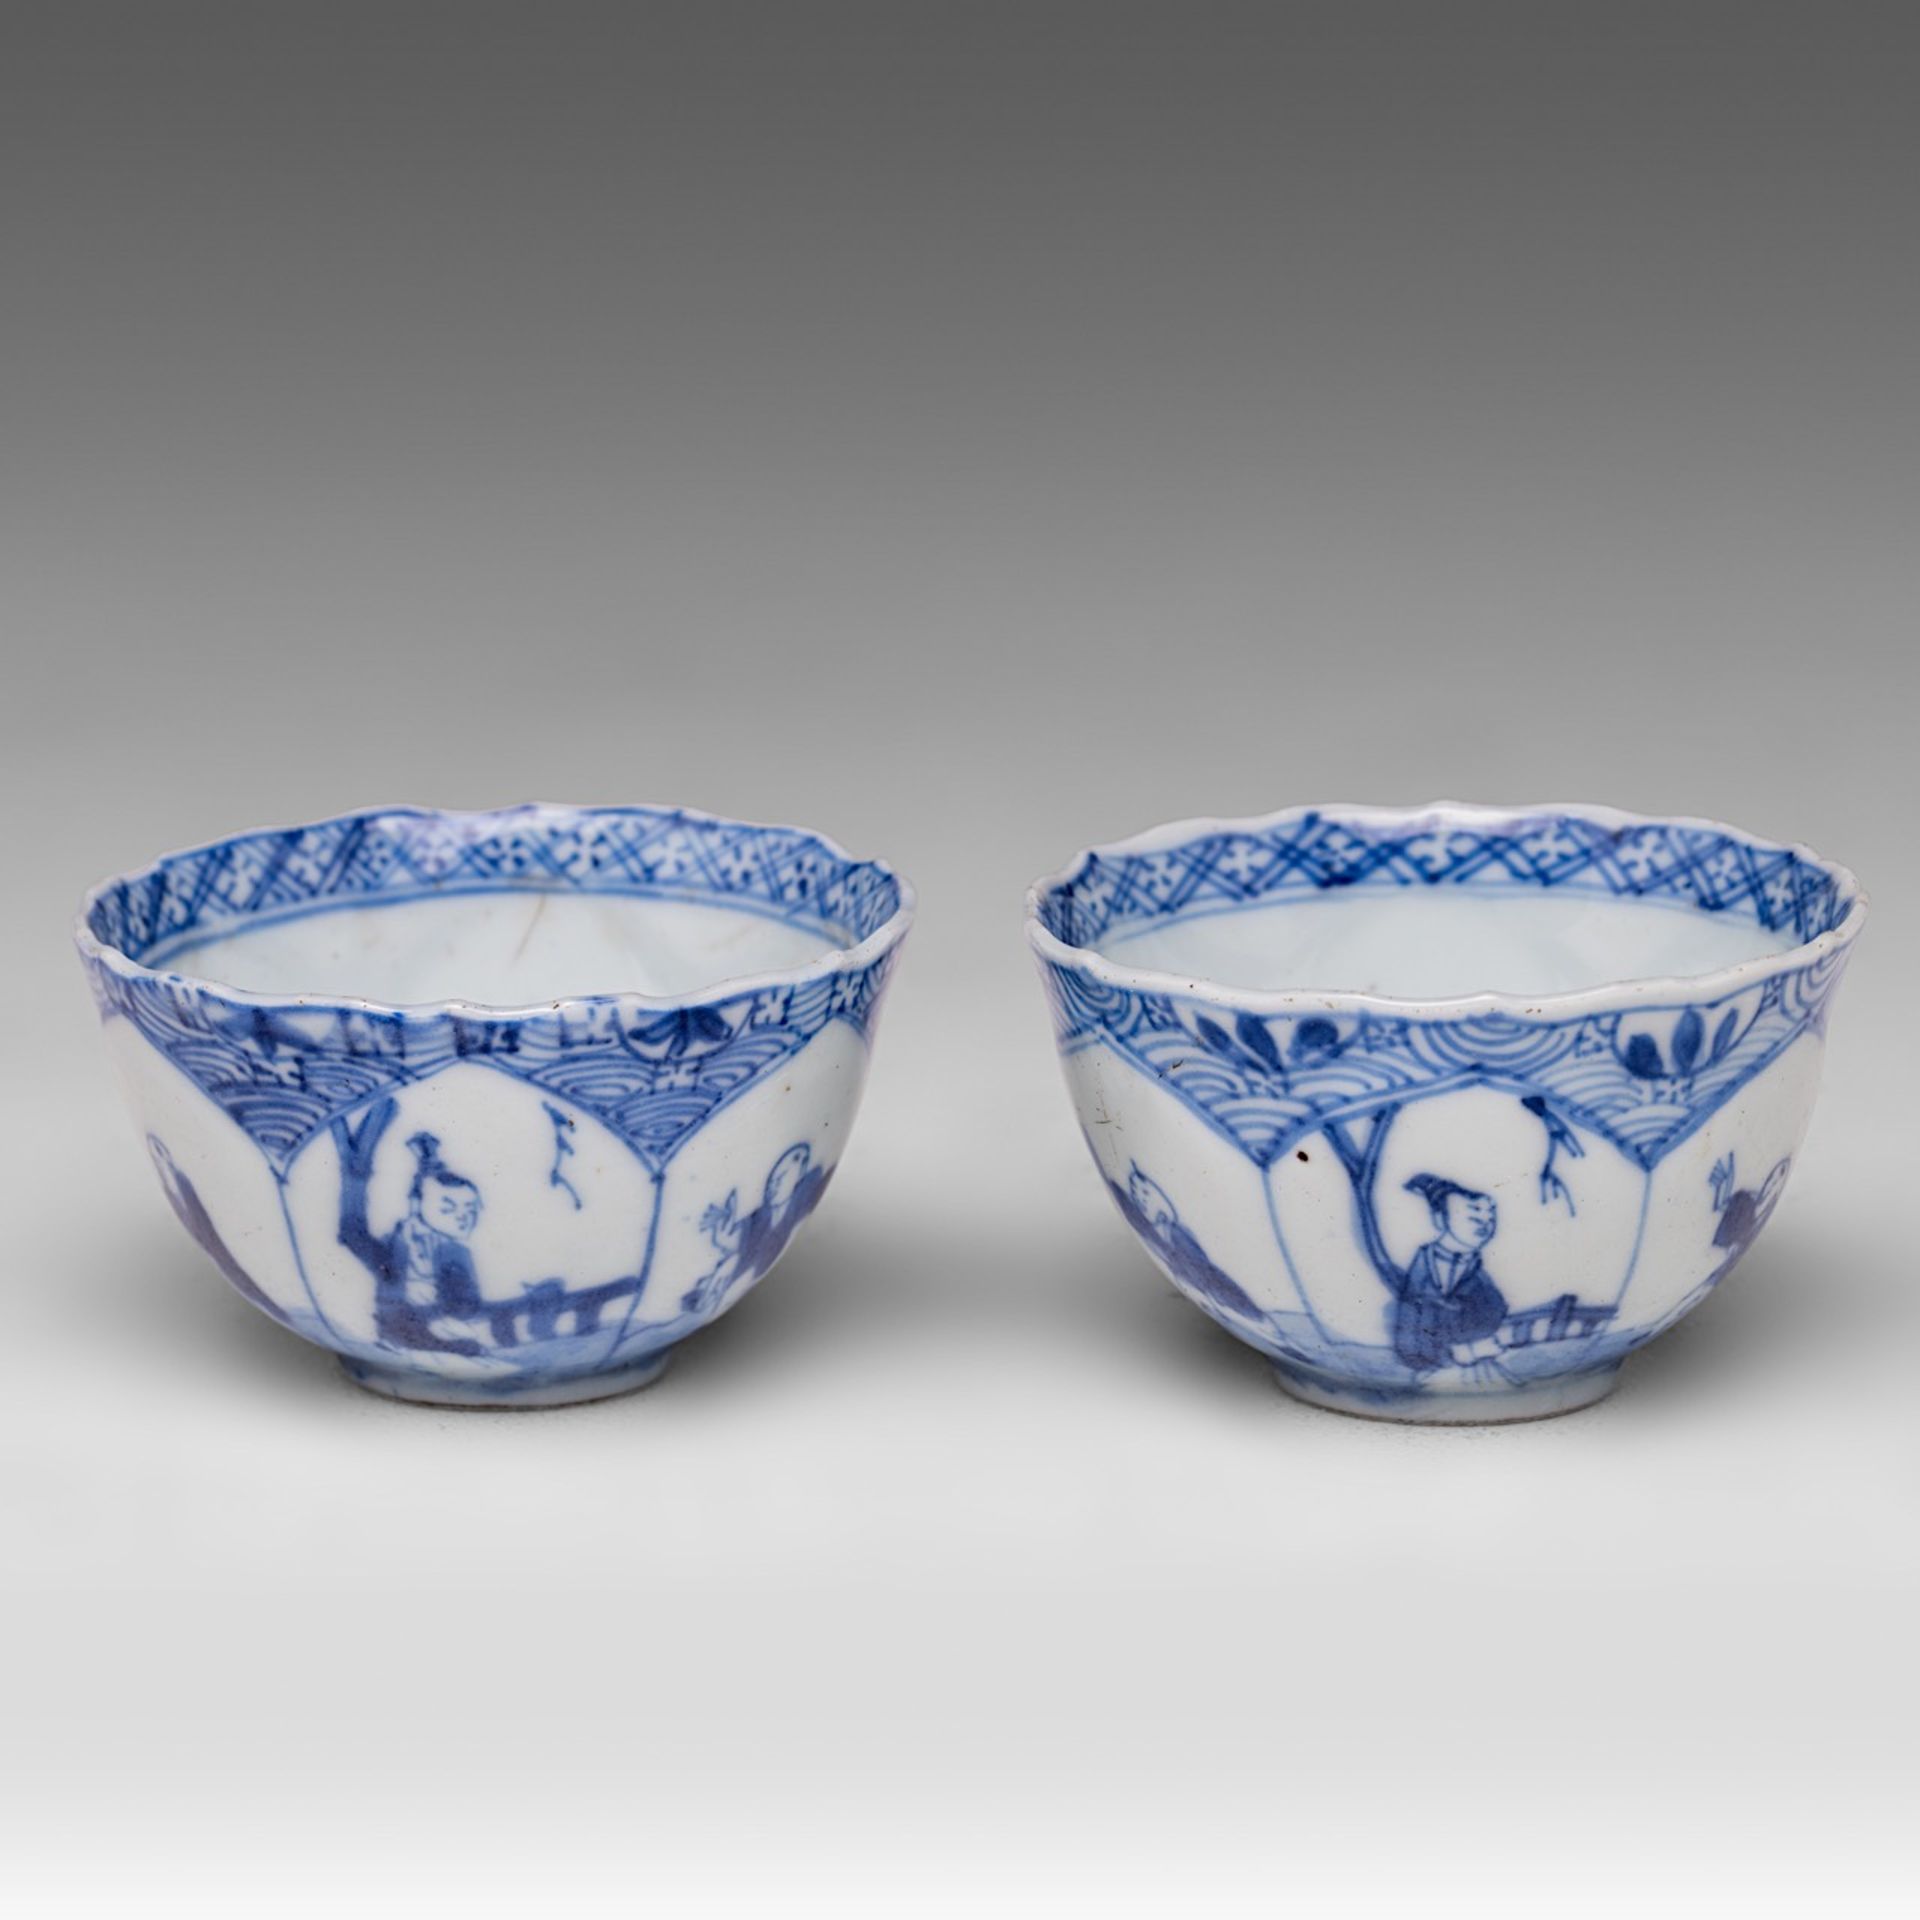 Two Chinese blue and white 'Long Elisa' tea cups, Kangxi period, H - dia cm